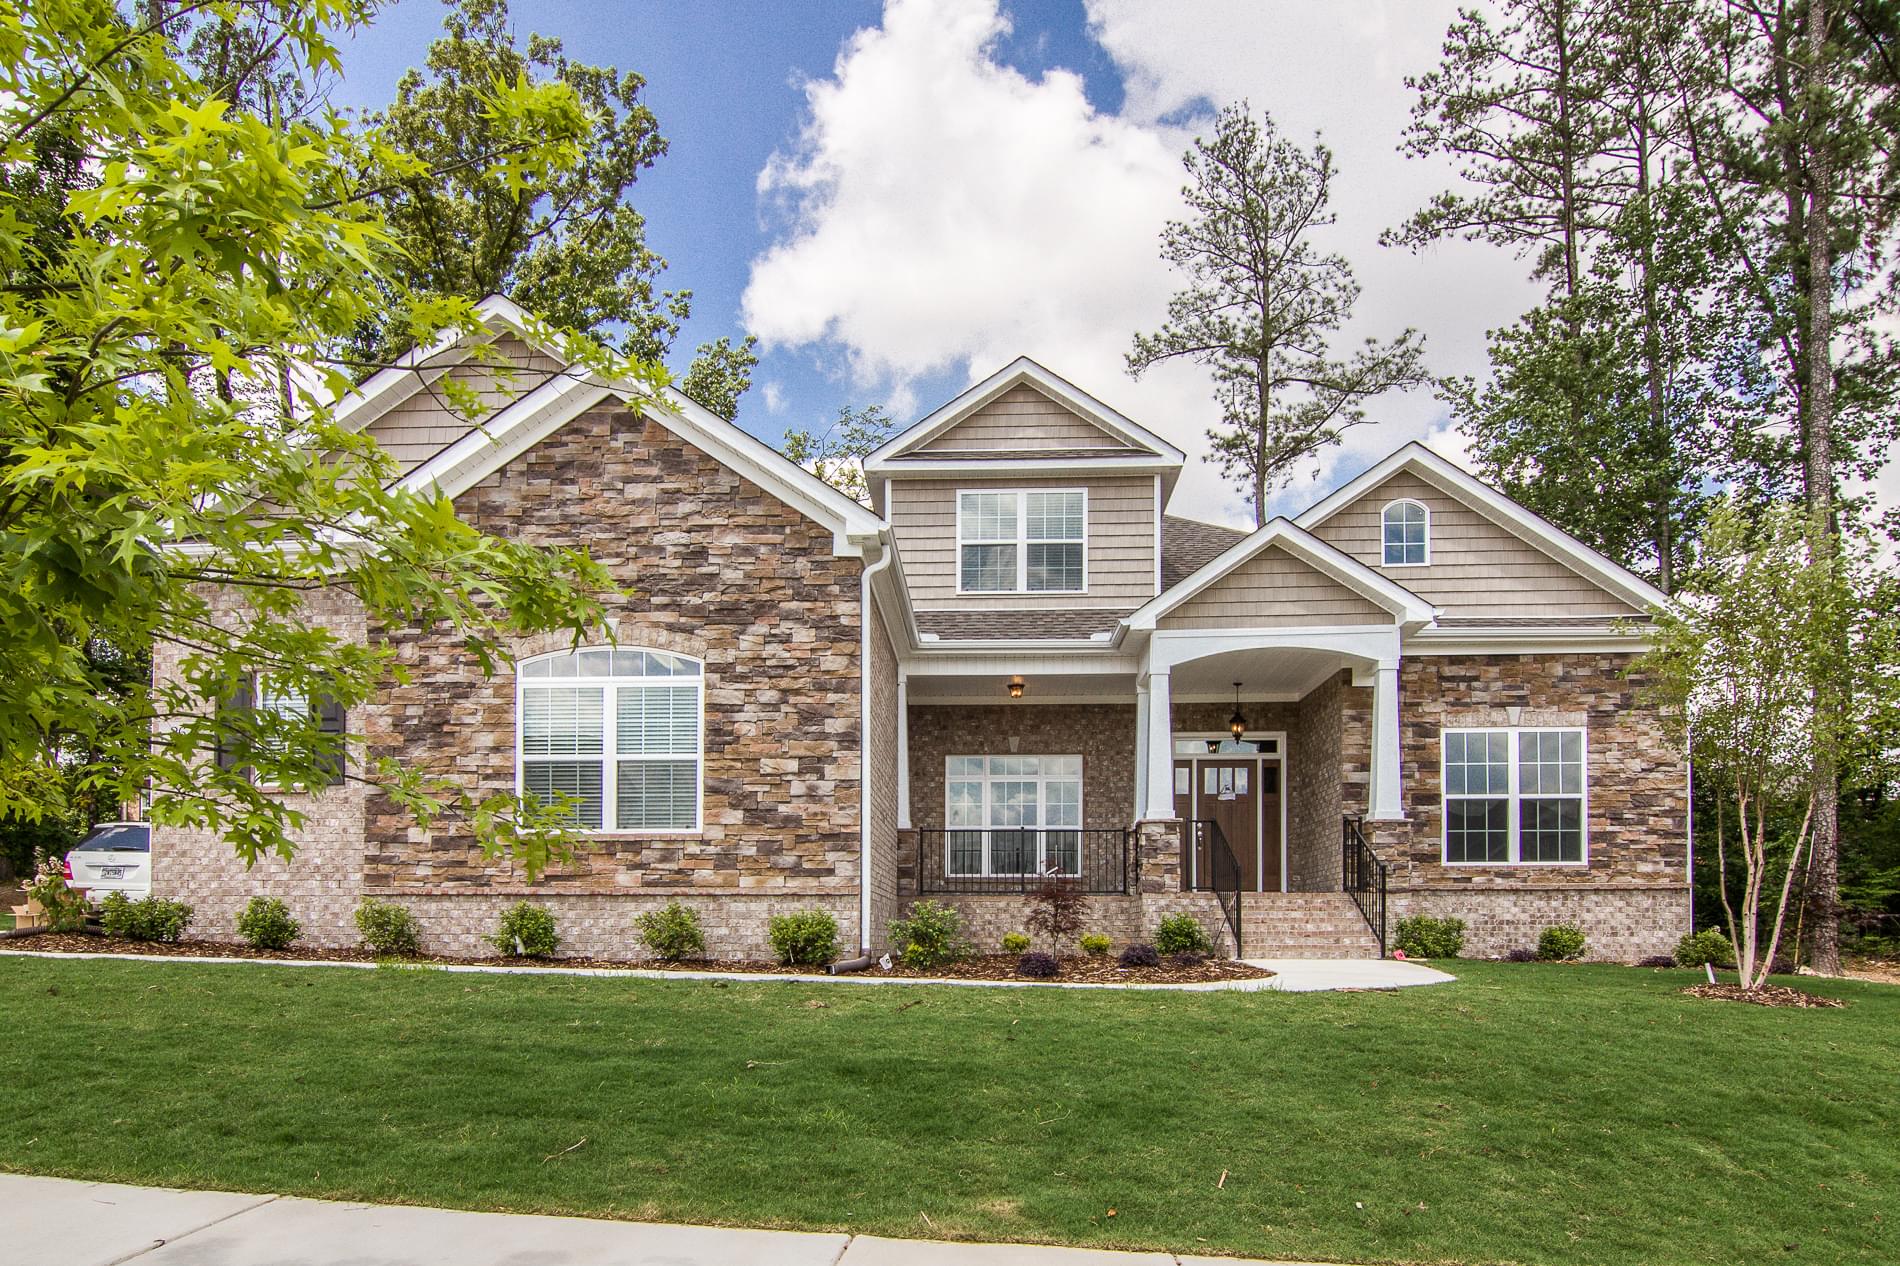 Elevation B. 4br New Home in Meridianville, AL